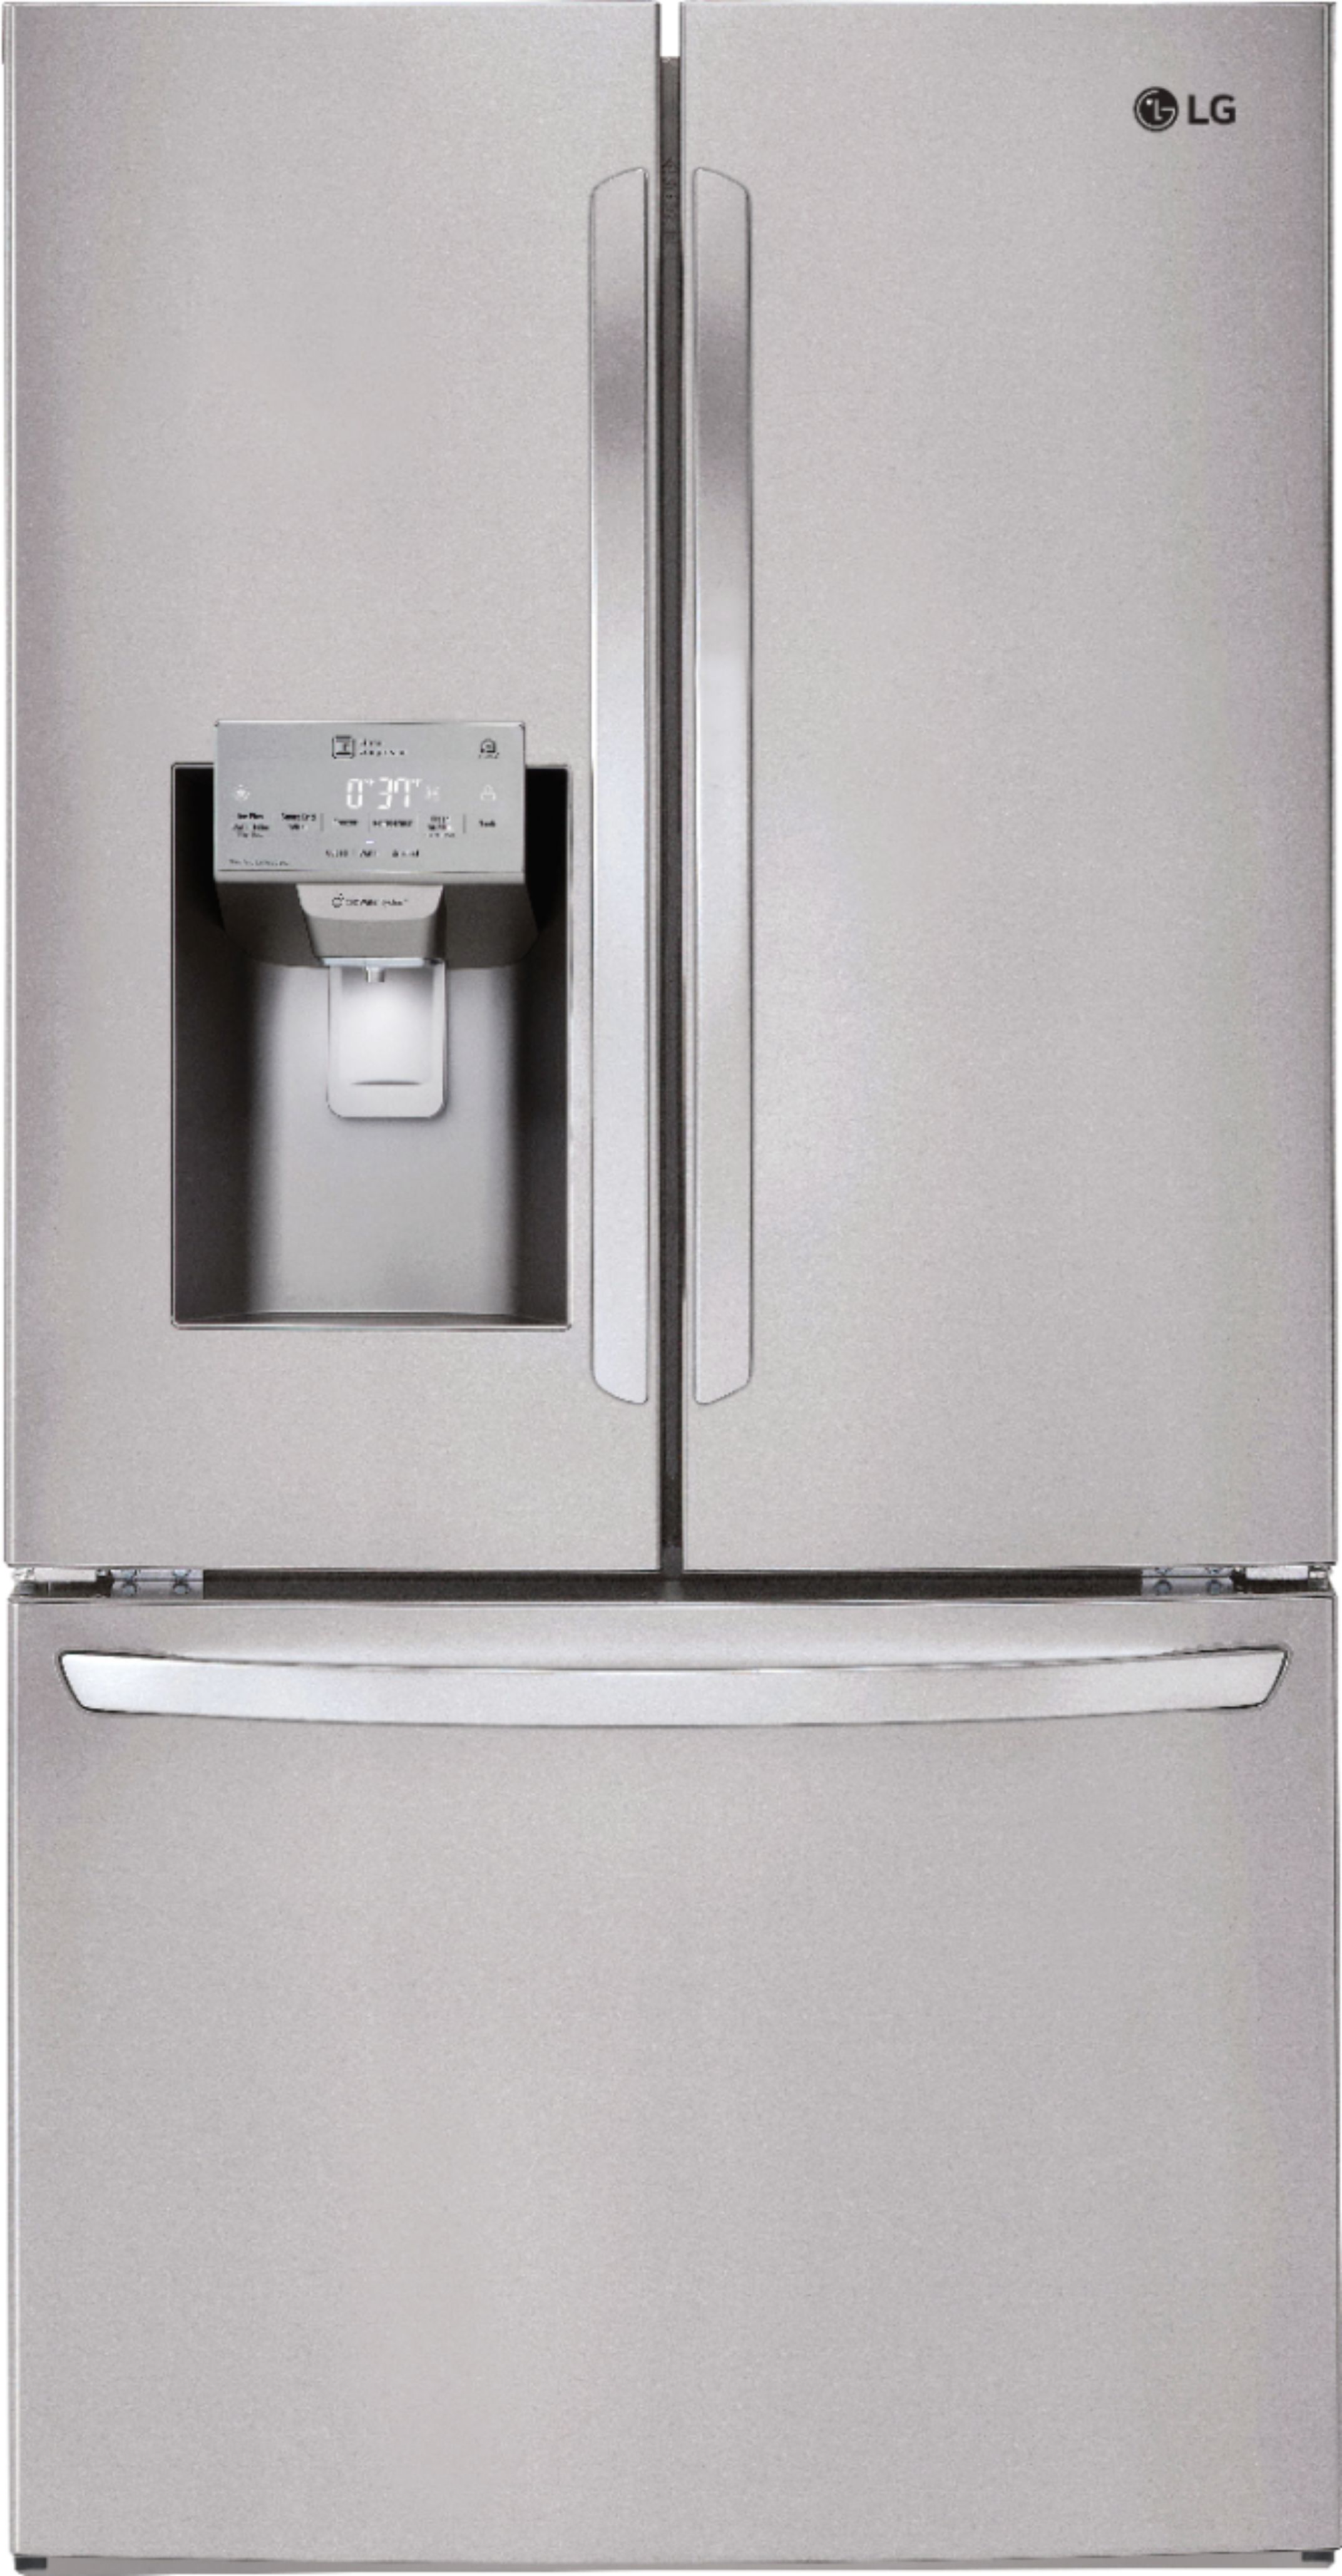 LG 26.2 Cu. Ft. French Door Smart Wi-Fi Enabled Refrigerator with ...